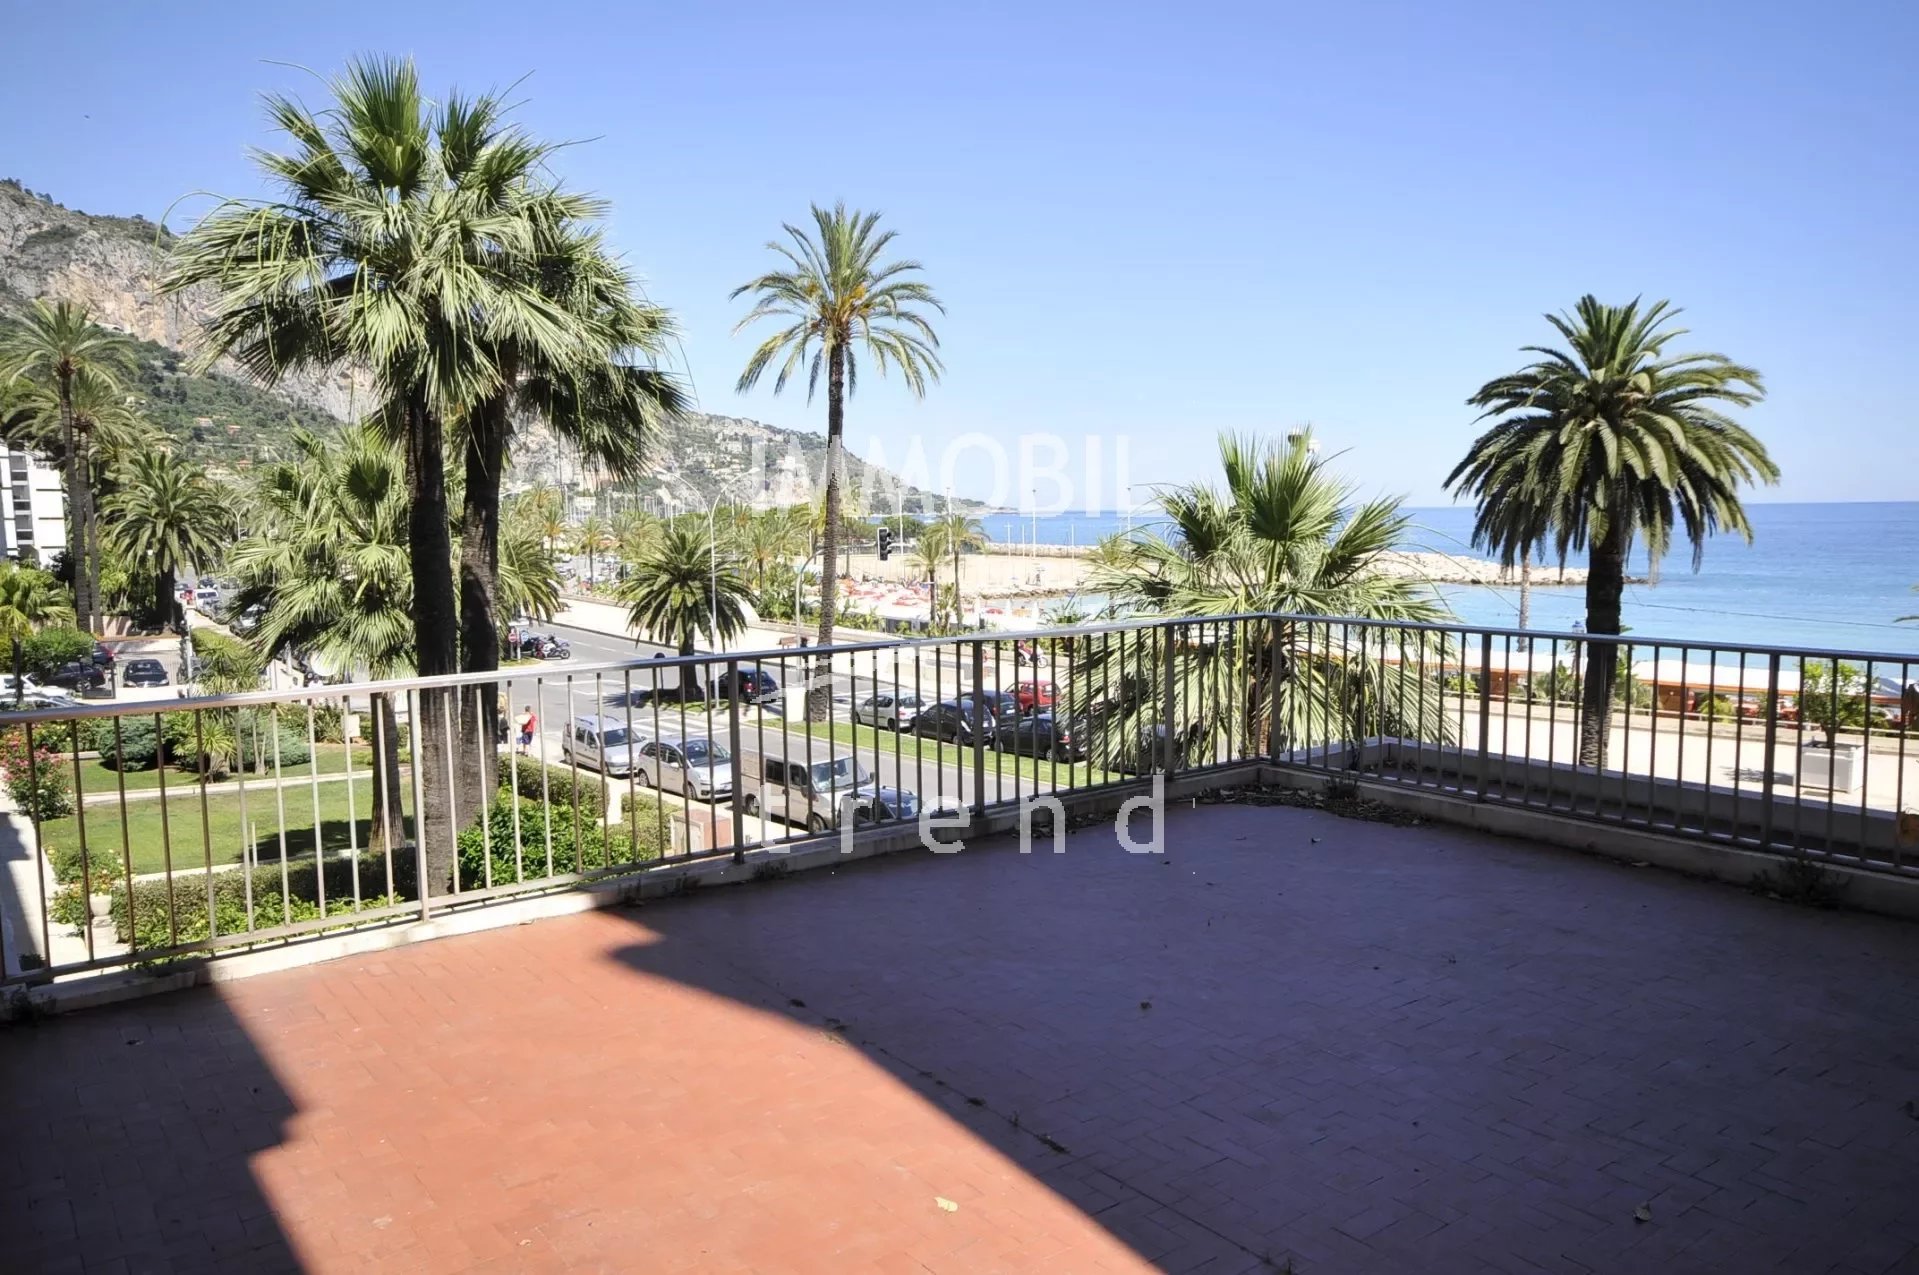 Real estate Menton - Two/three bedroom apartment with big terrace and panoramic view in a good standing seafront building